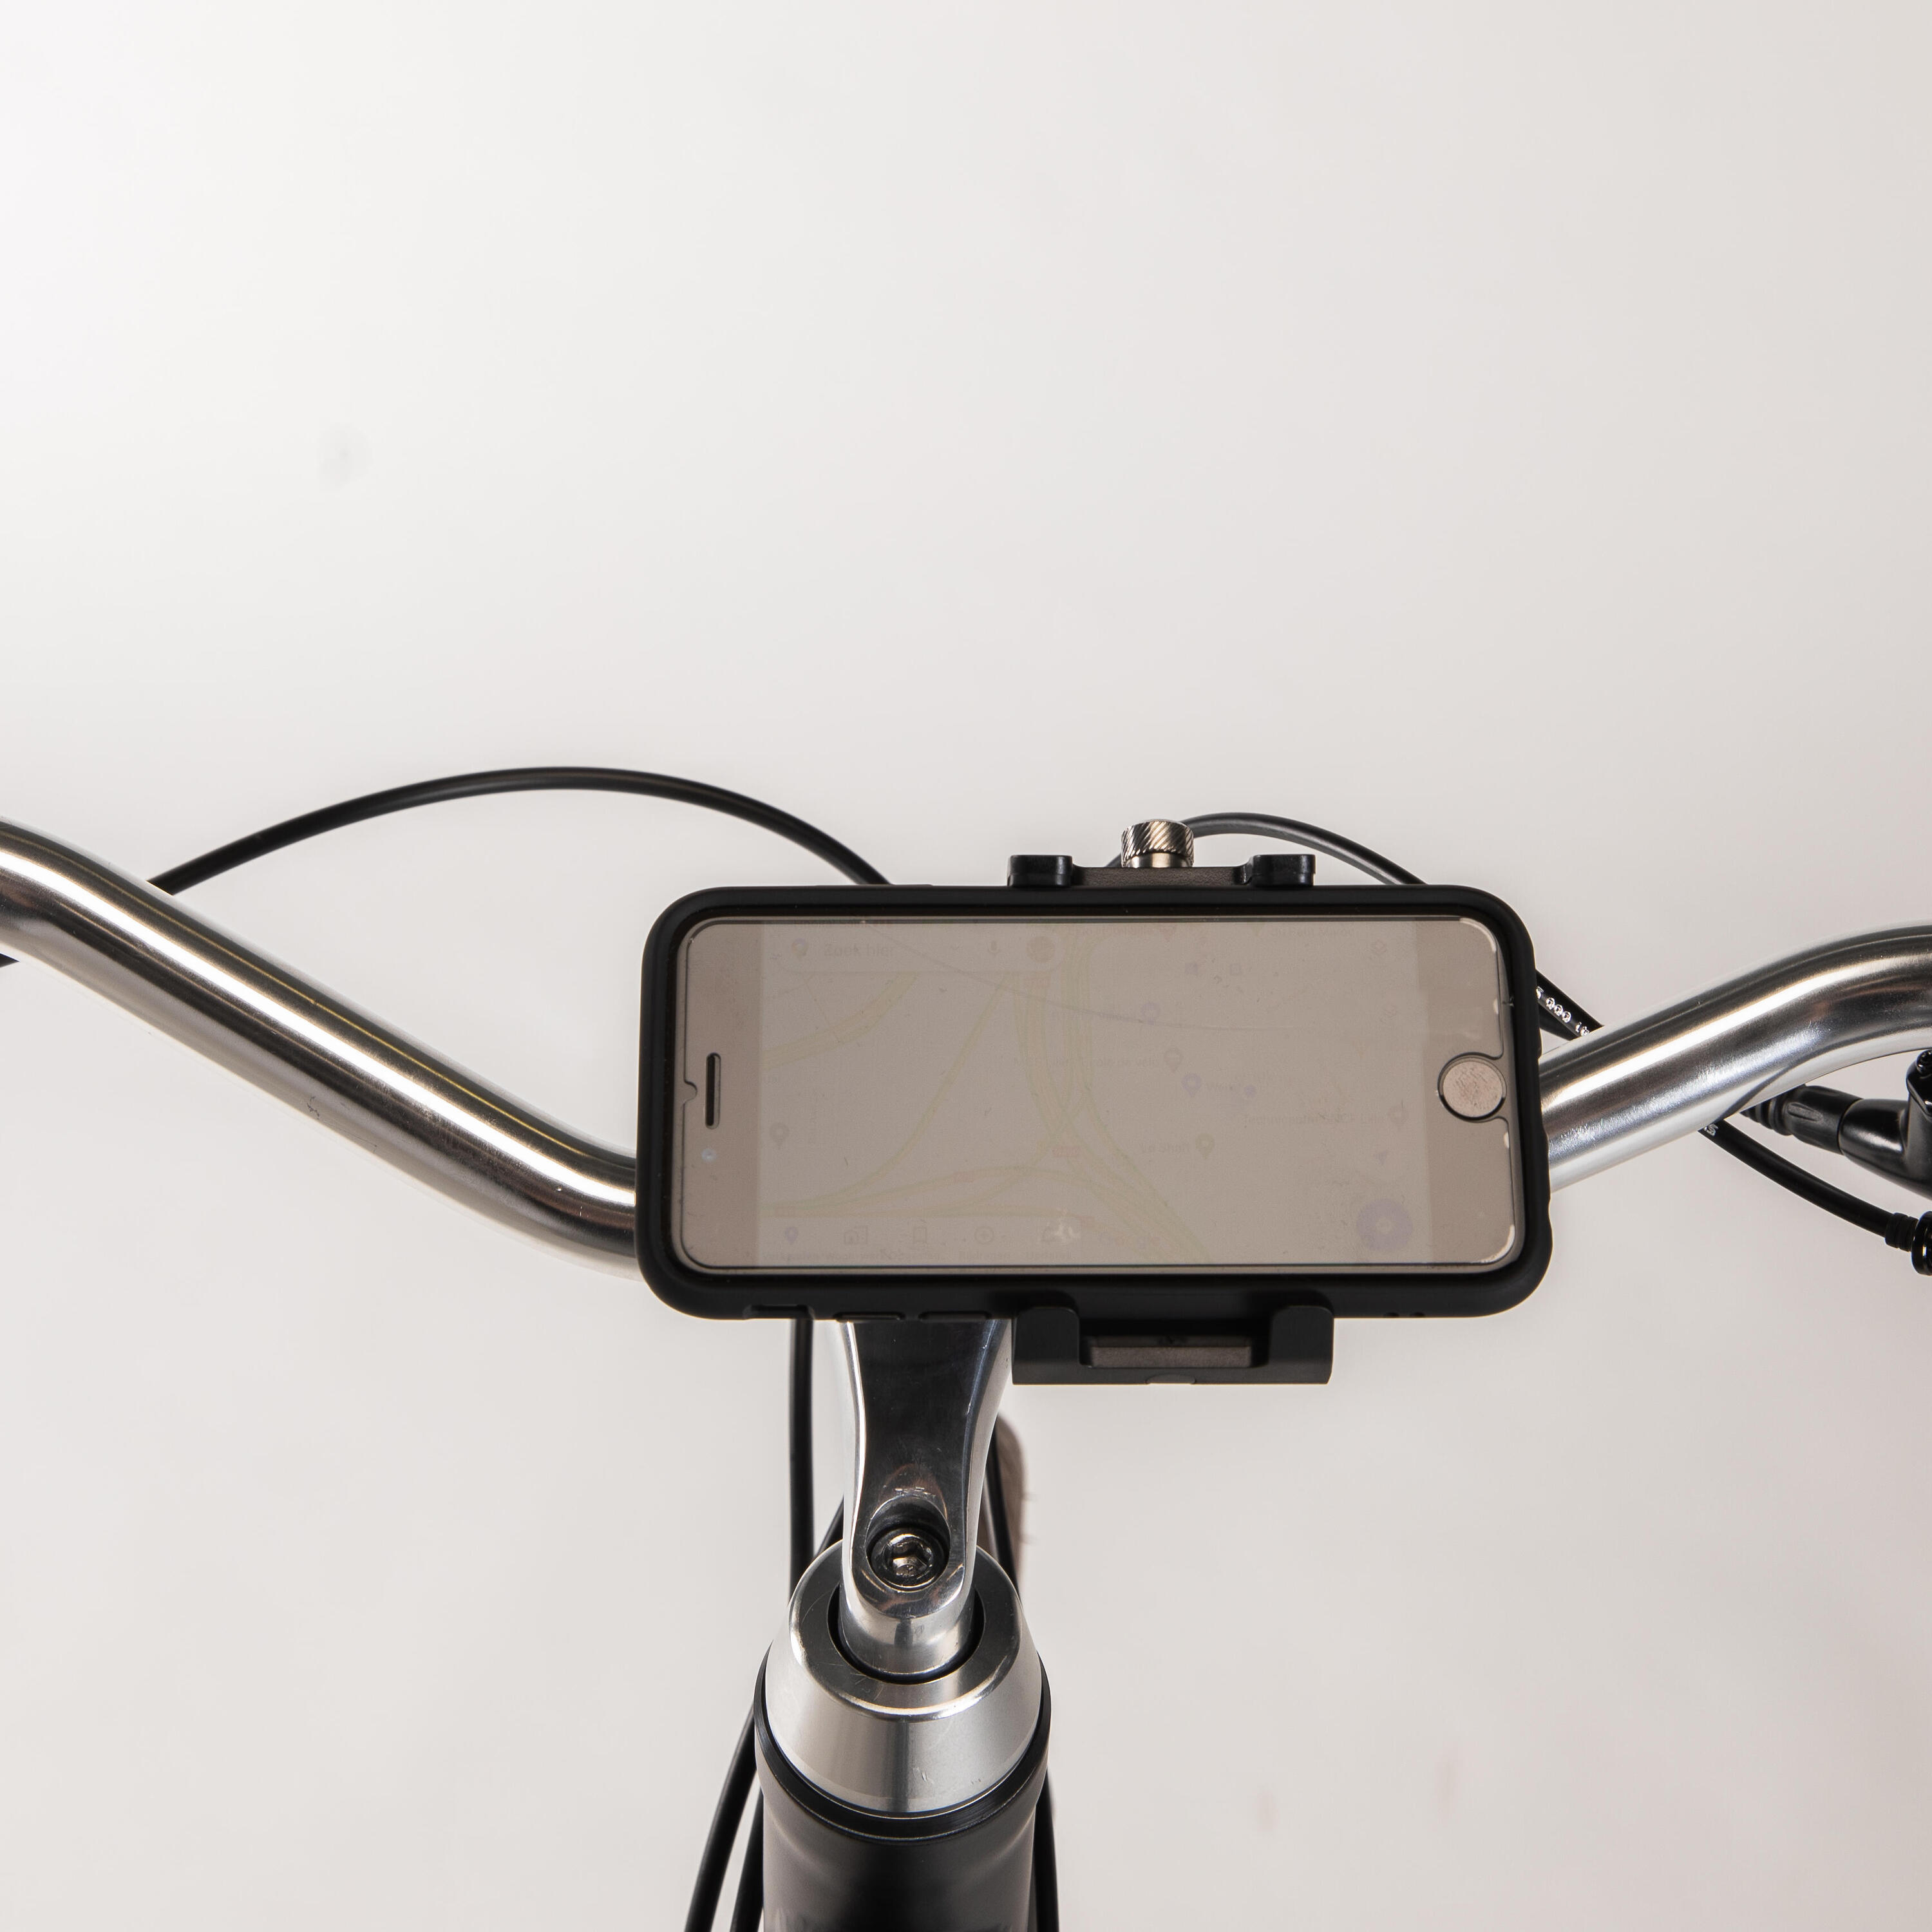 Easy Cycling Smartphone Mount 13/14